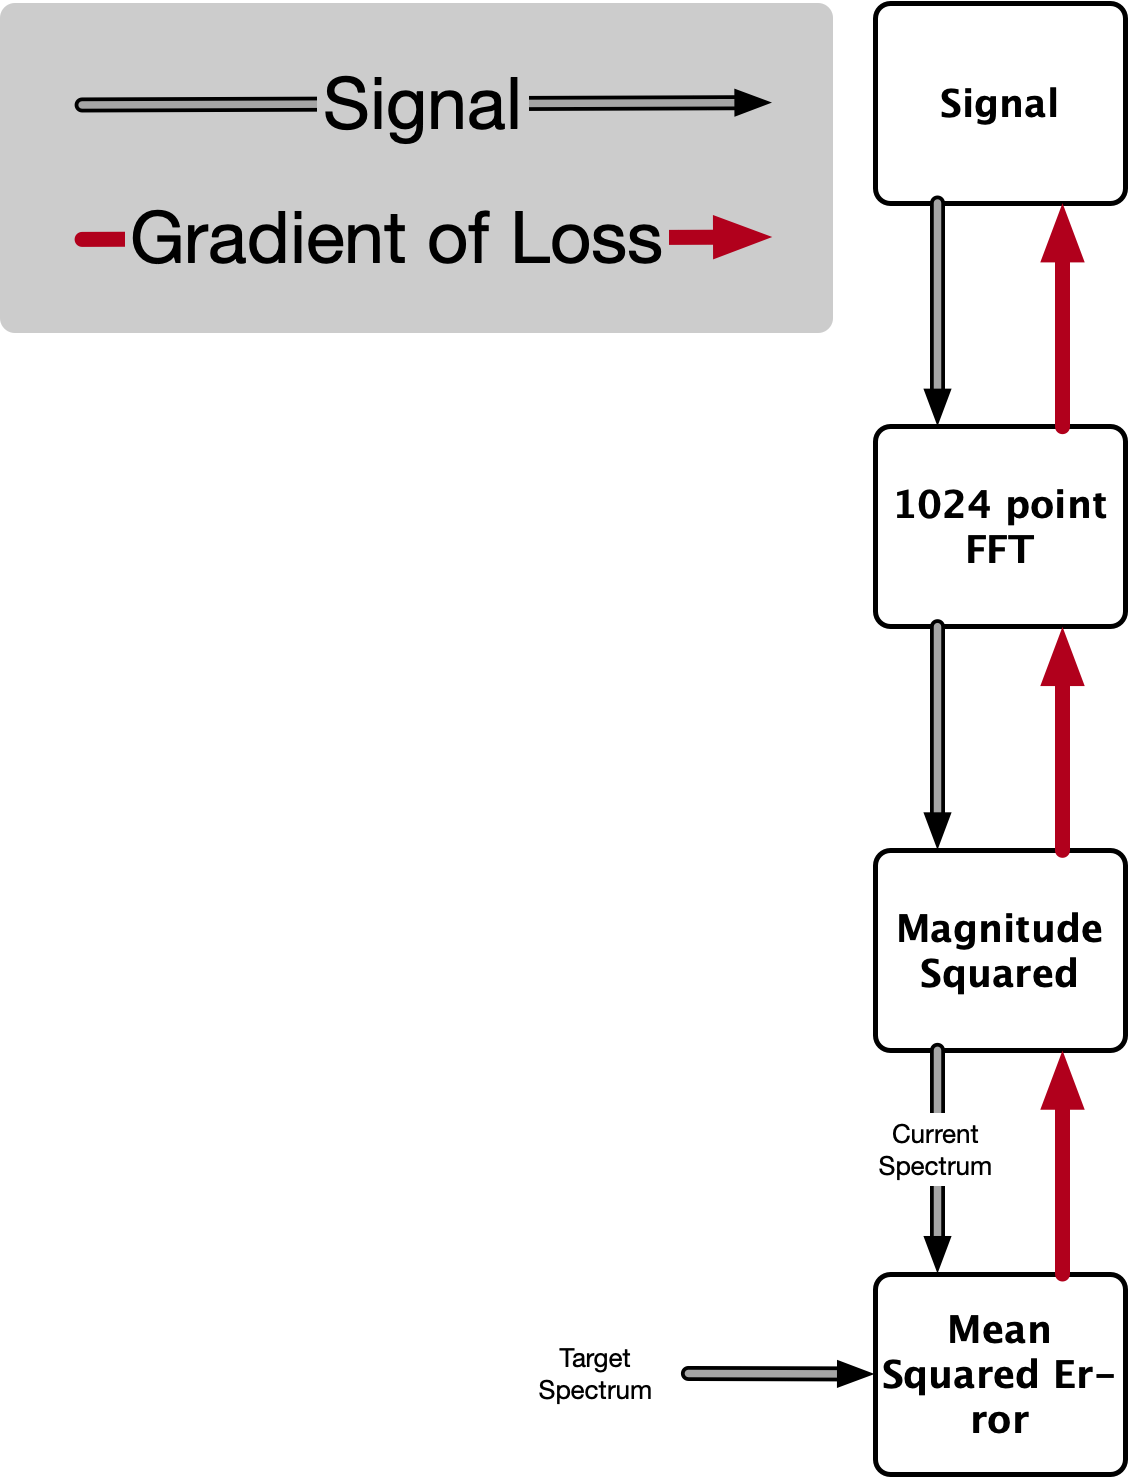 Overview of simplistic example for utilizing spectral loss